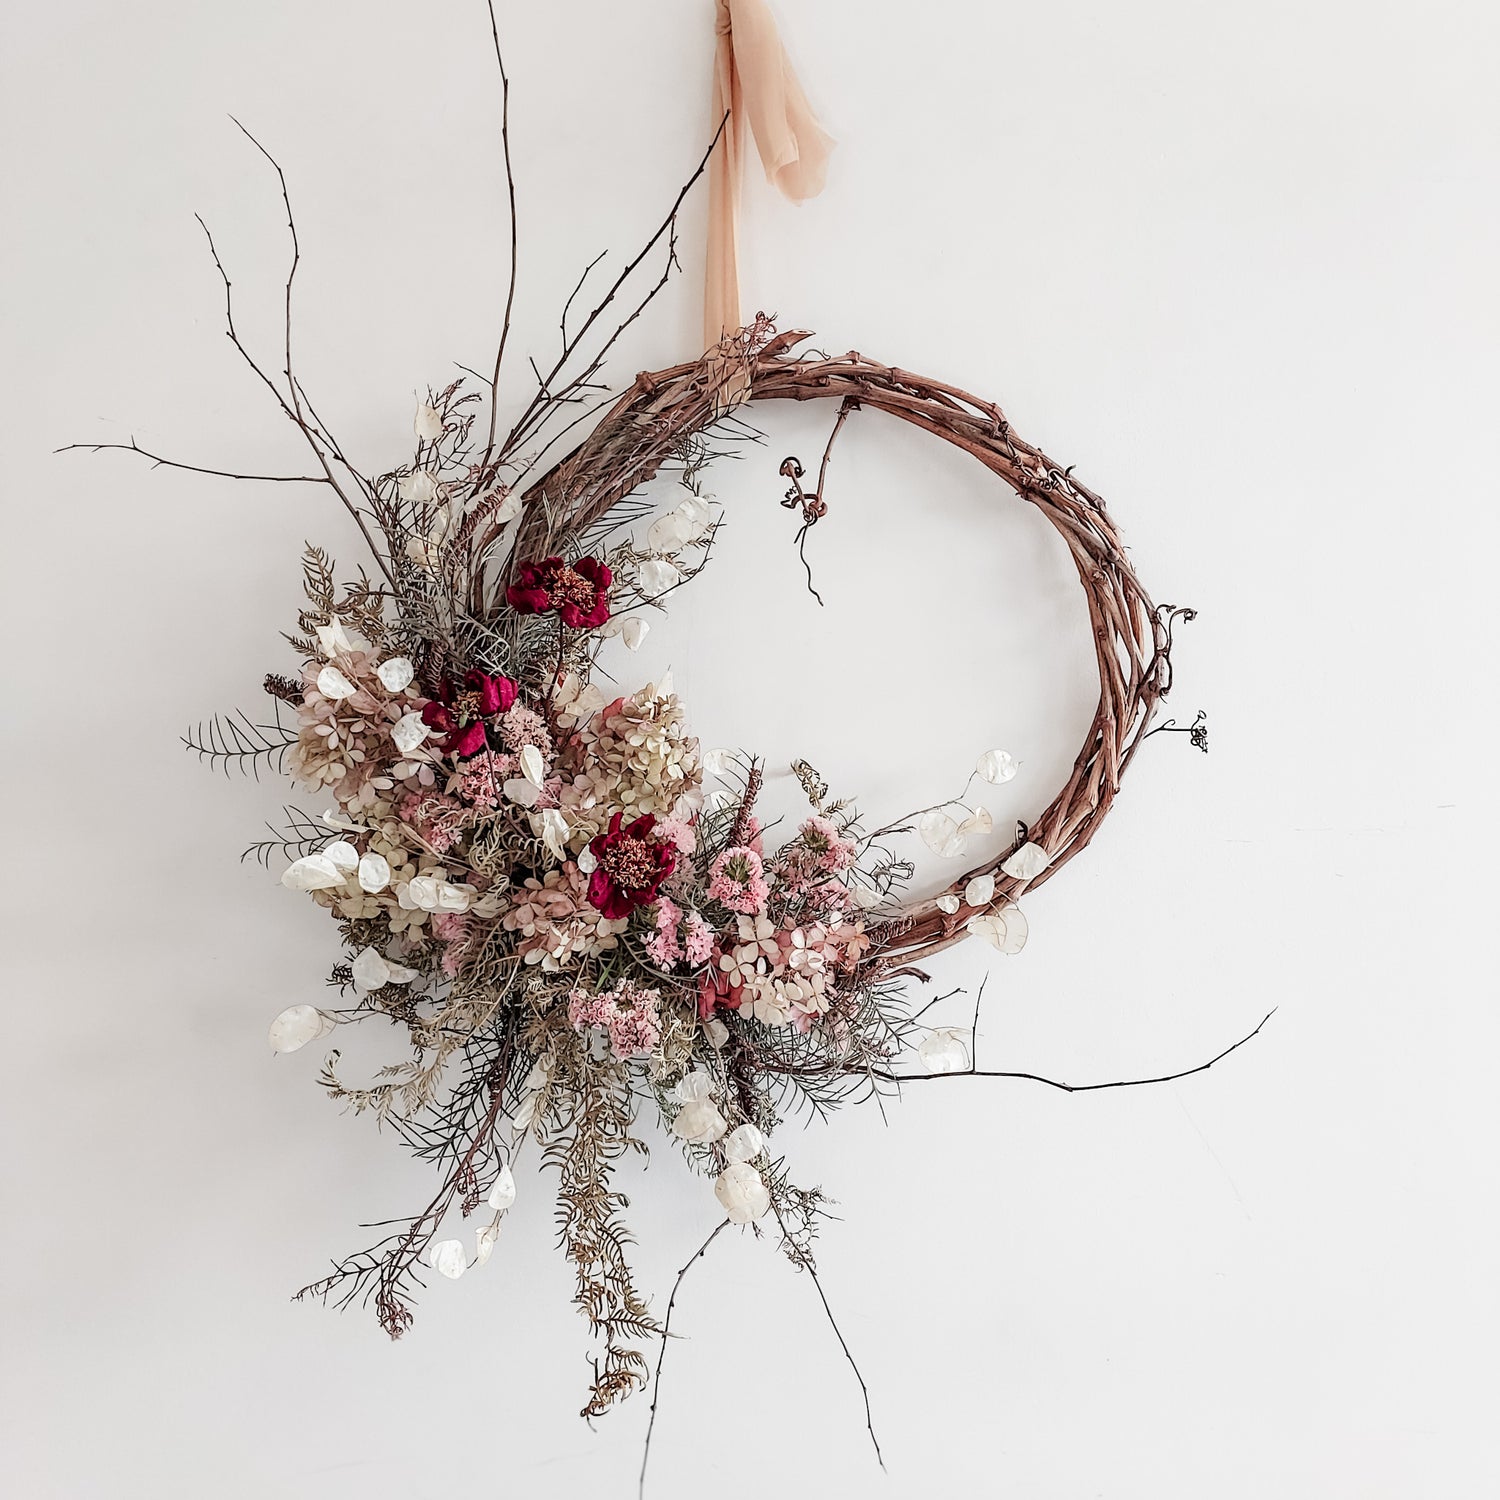 Dried flower wreath in a wild and whimsical style on a grapevine base.